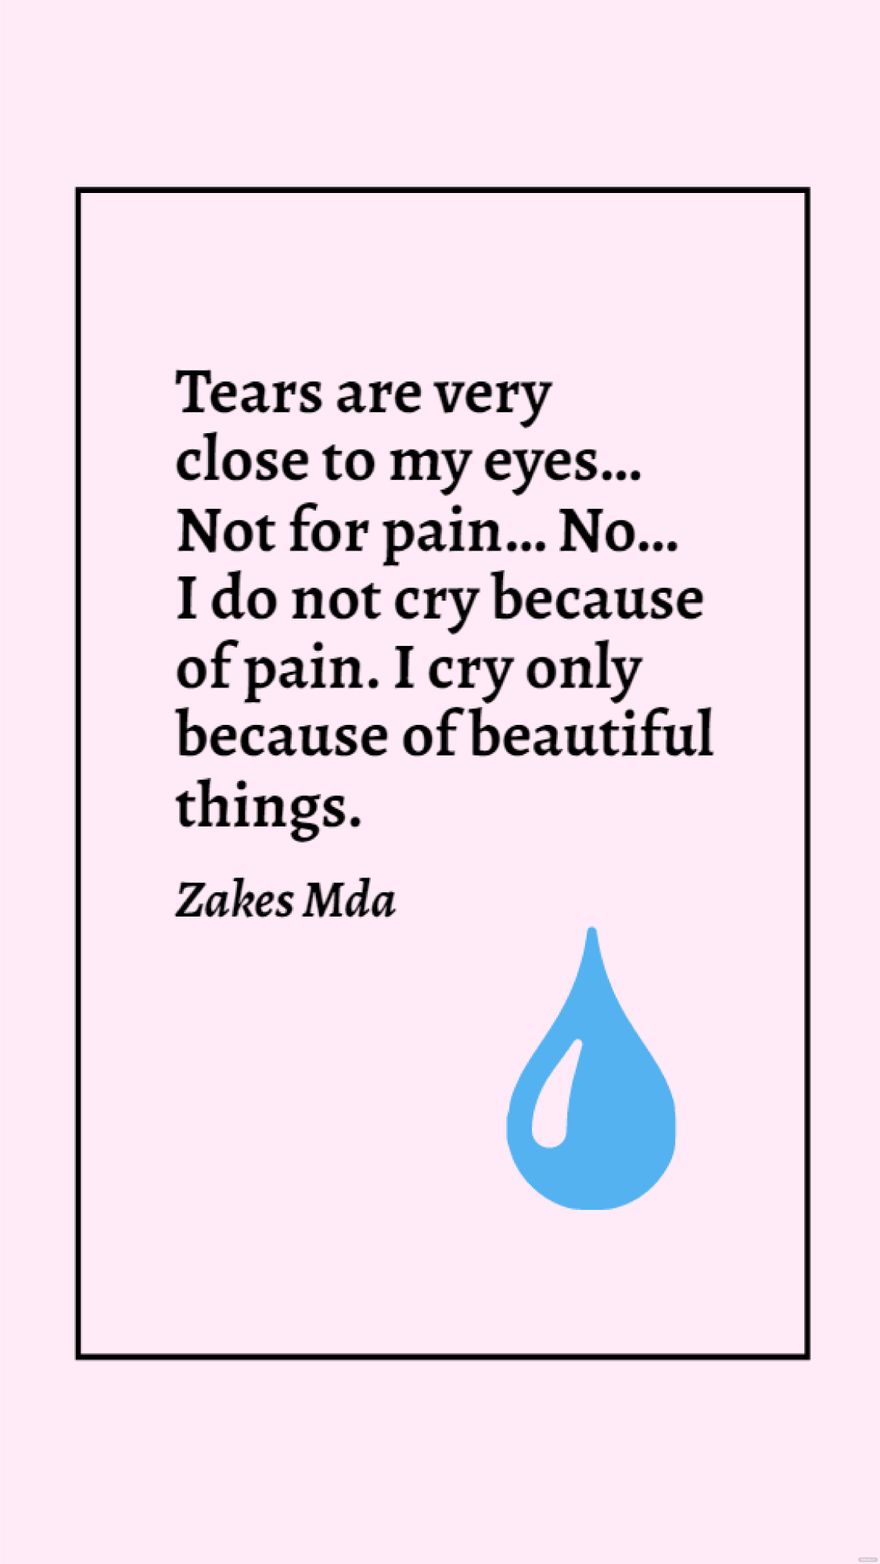 Zakes Mda - Tears are very close to my eyes… Not for pain… no… I do not cry because of pain. I cry only because of beautiful things.